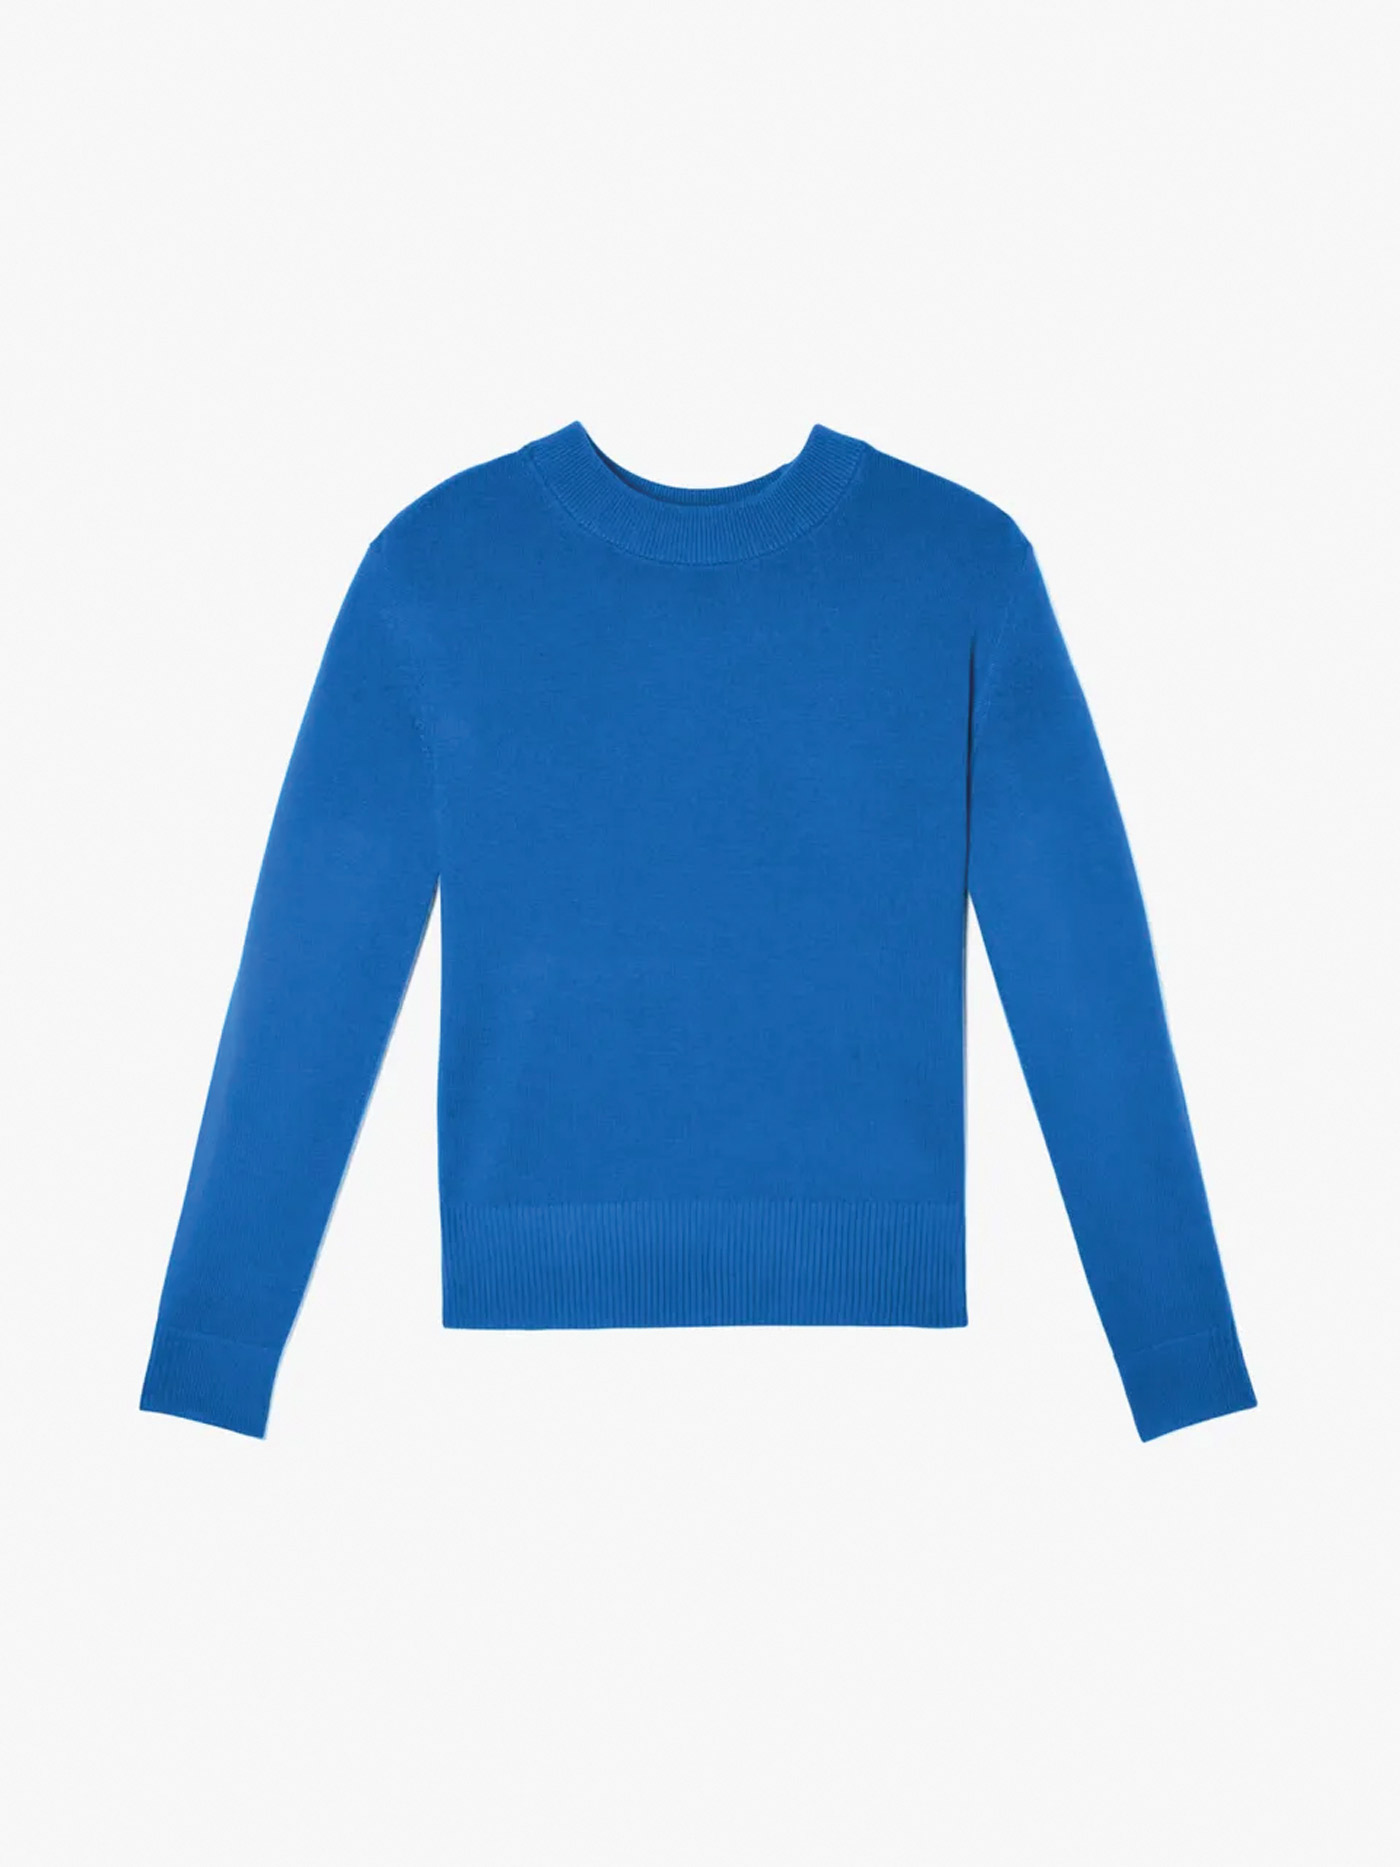 The Cashmere Crew $145 Everlane, Lake Forest